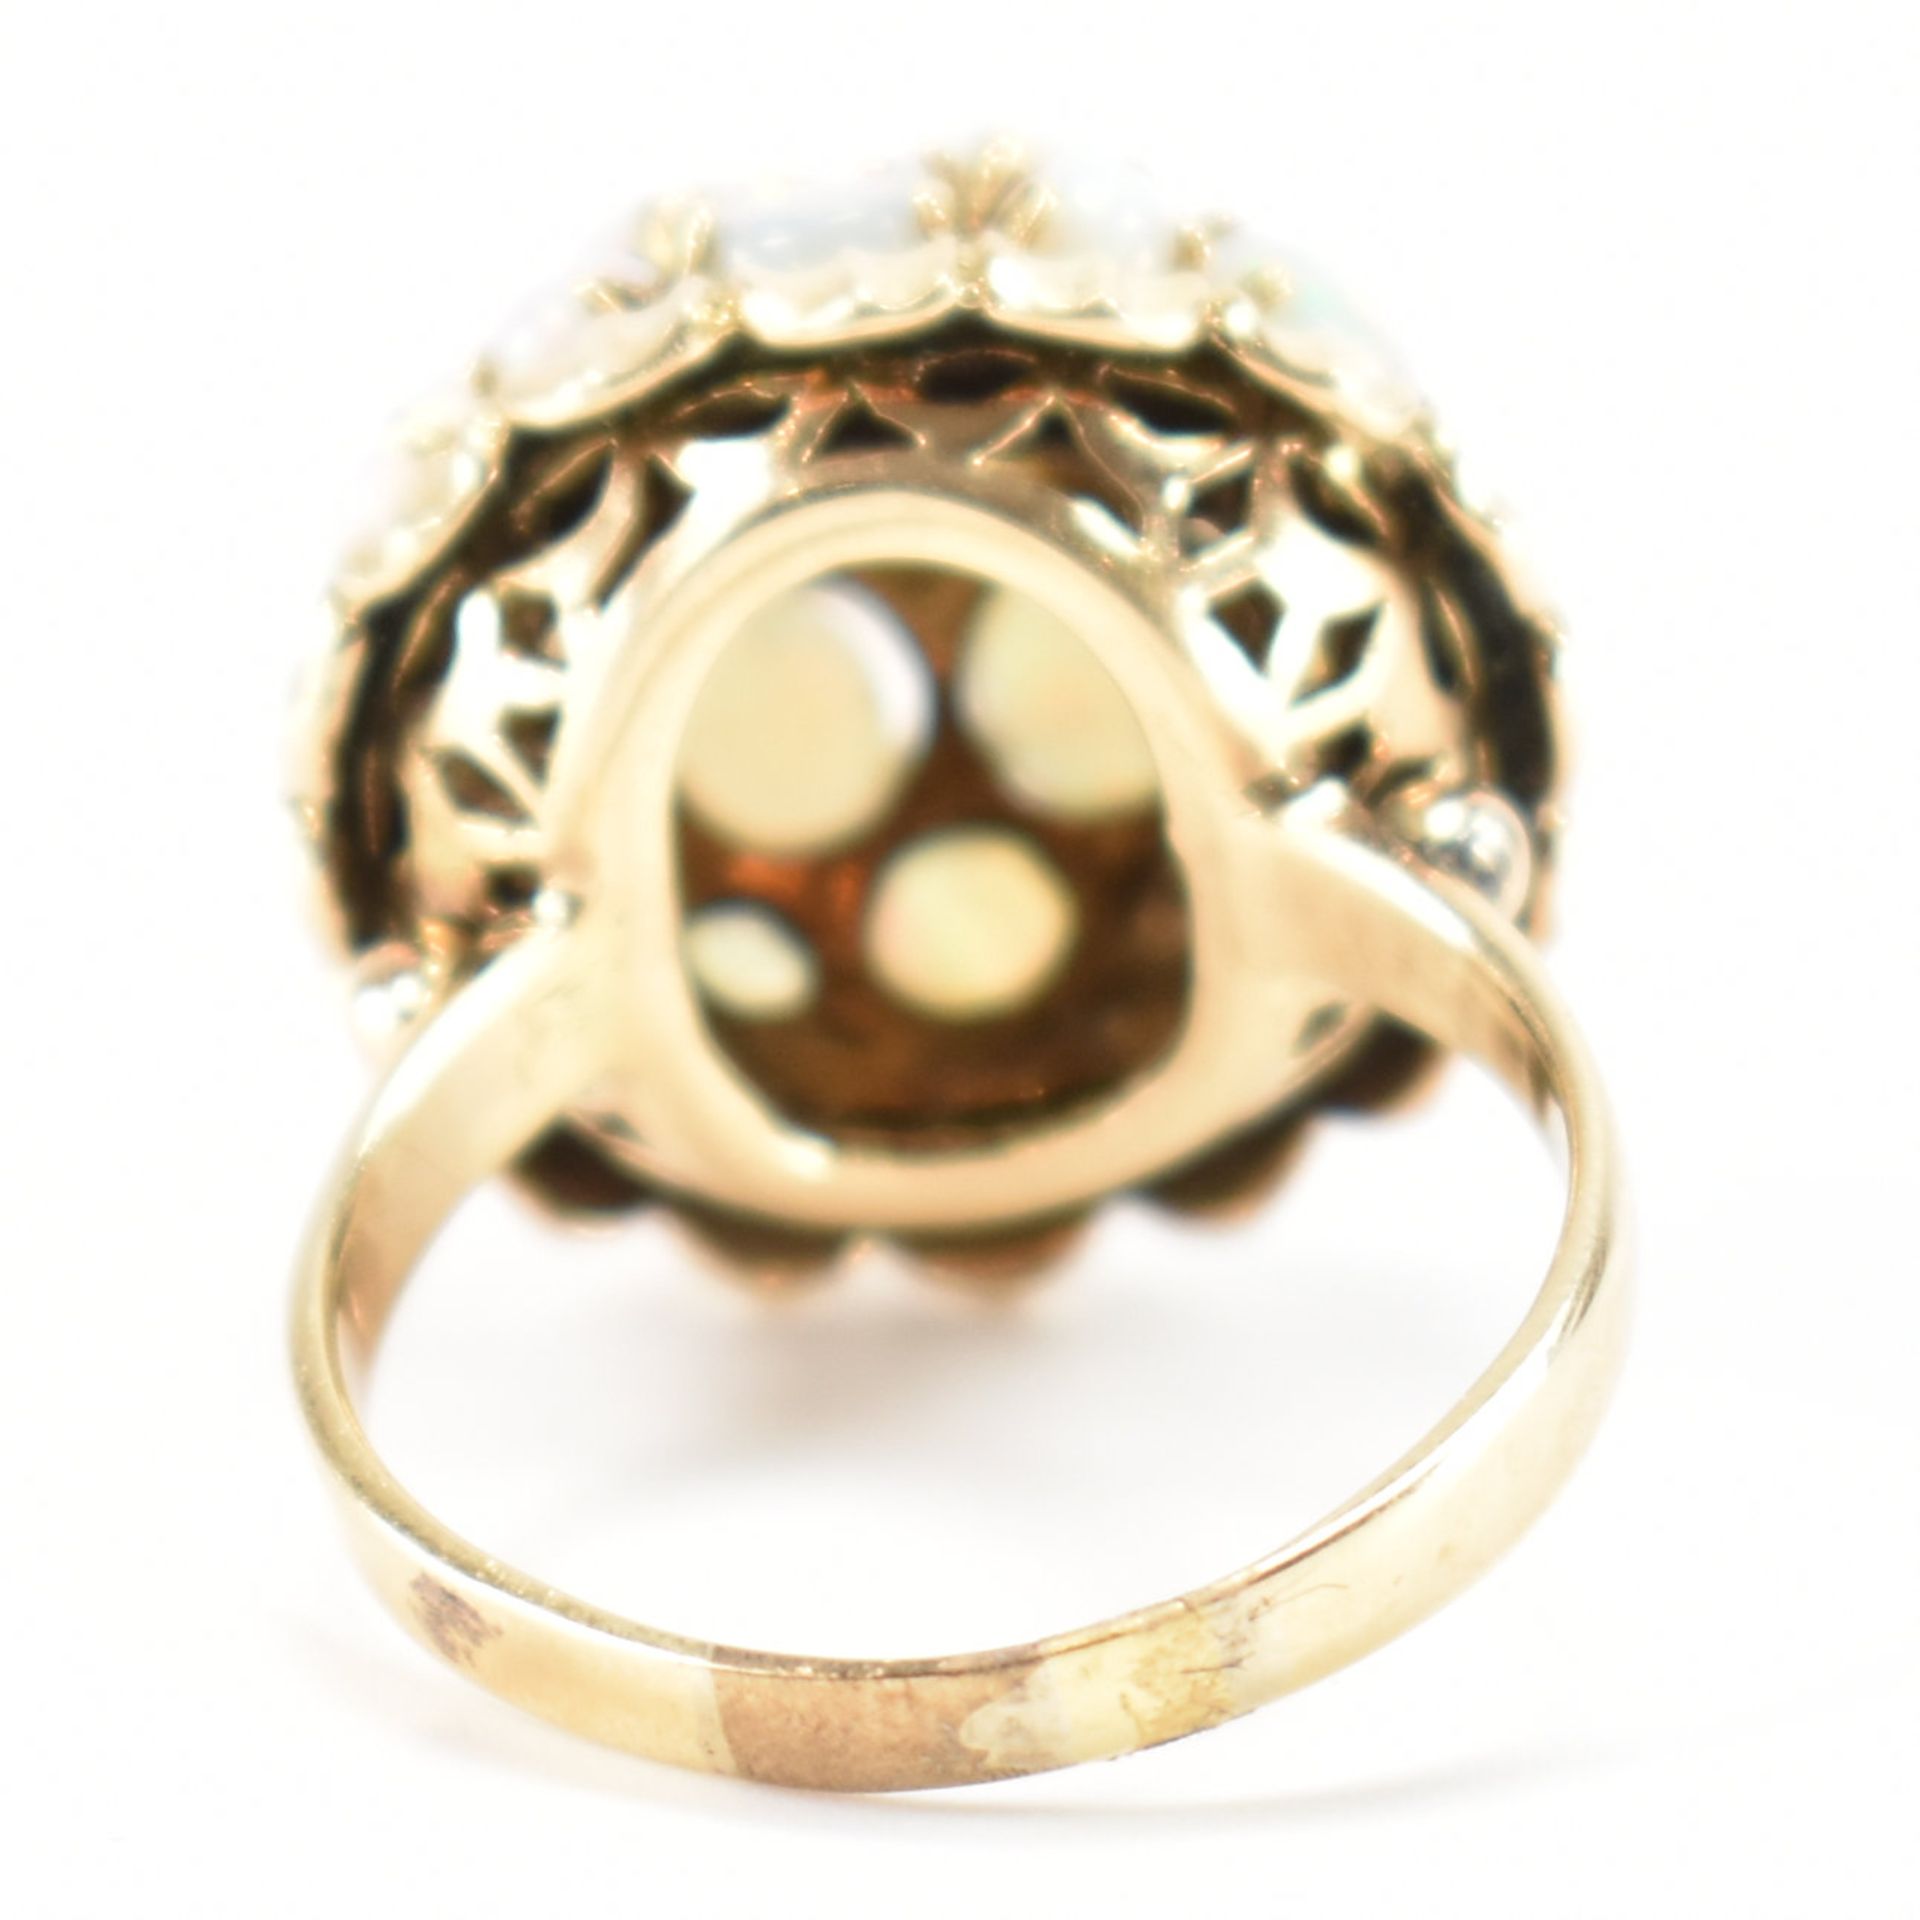 VINTAGE GOLD & OPAL BOMBE RING - Image 4 of 11